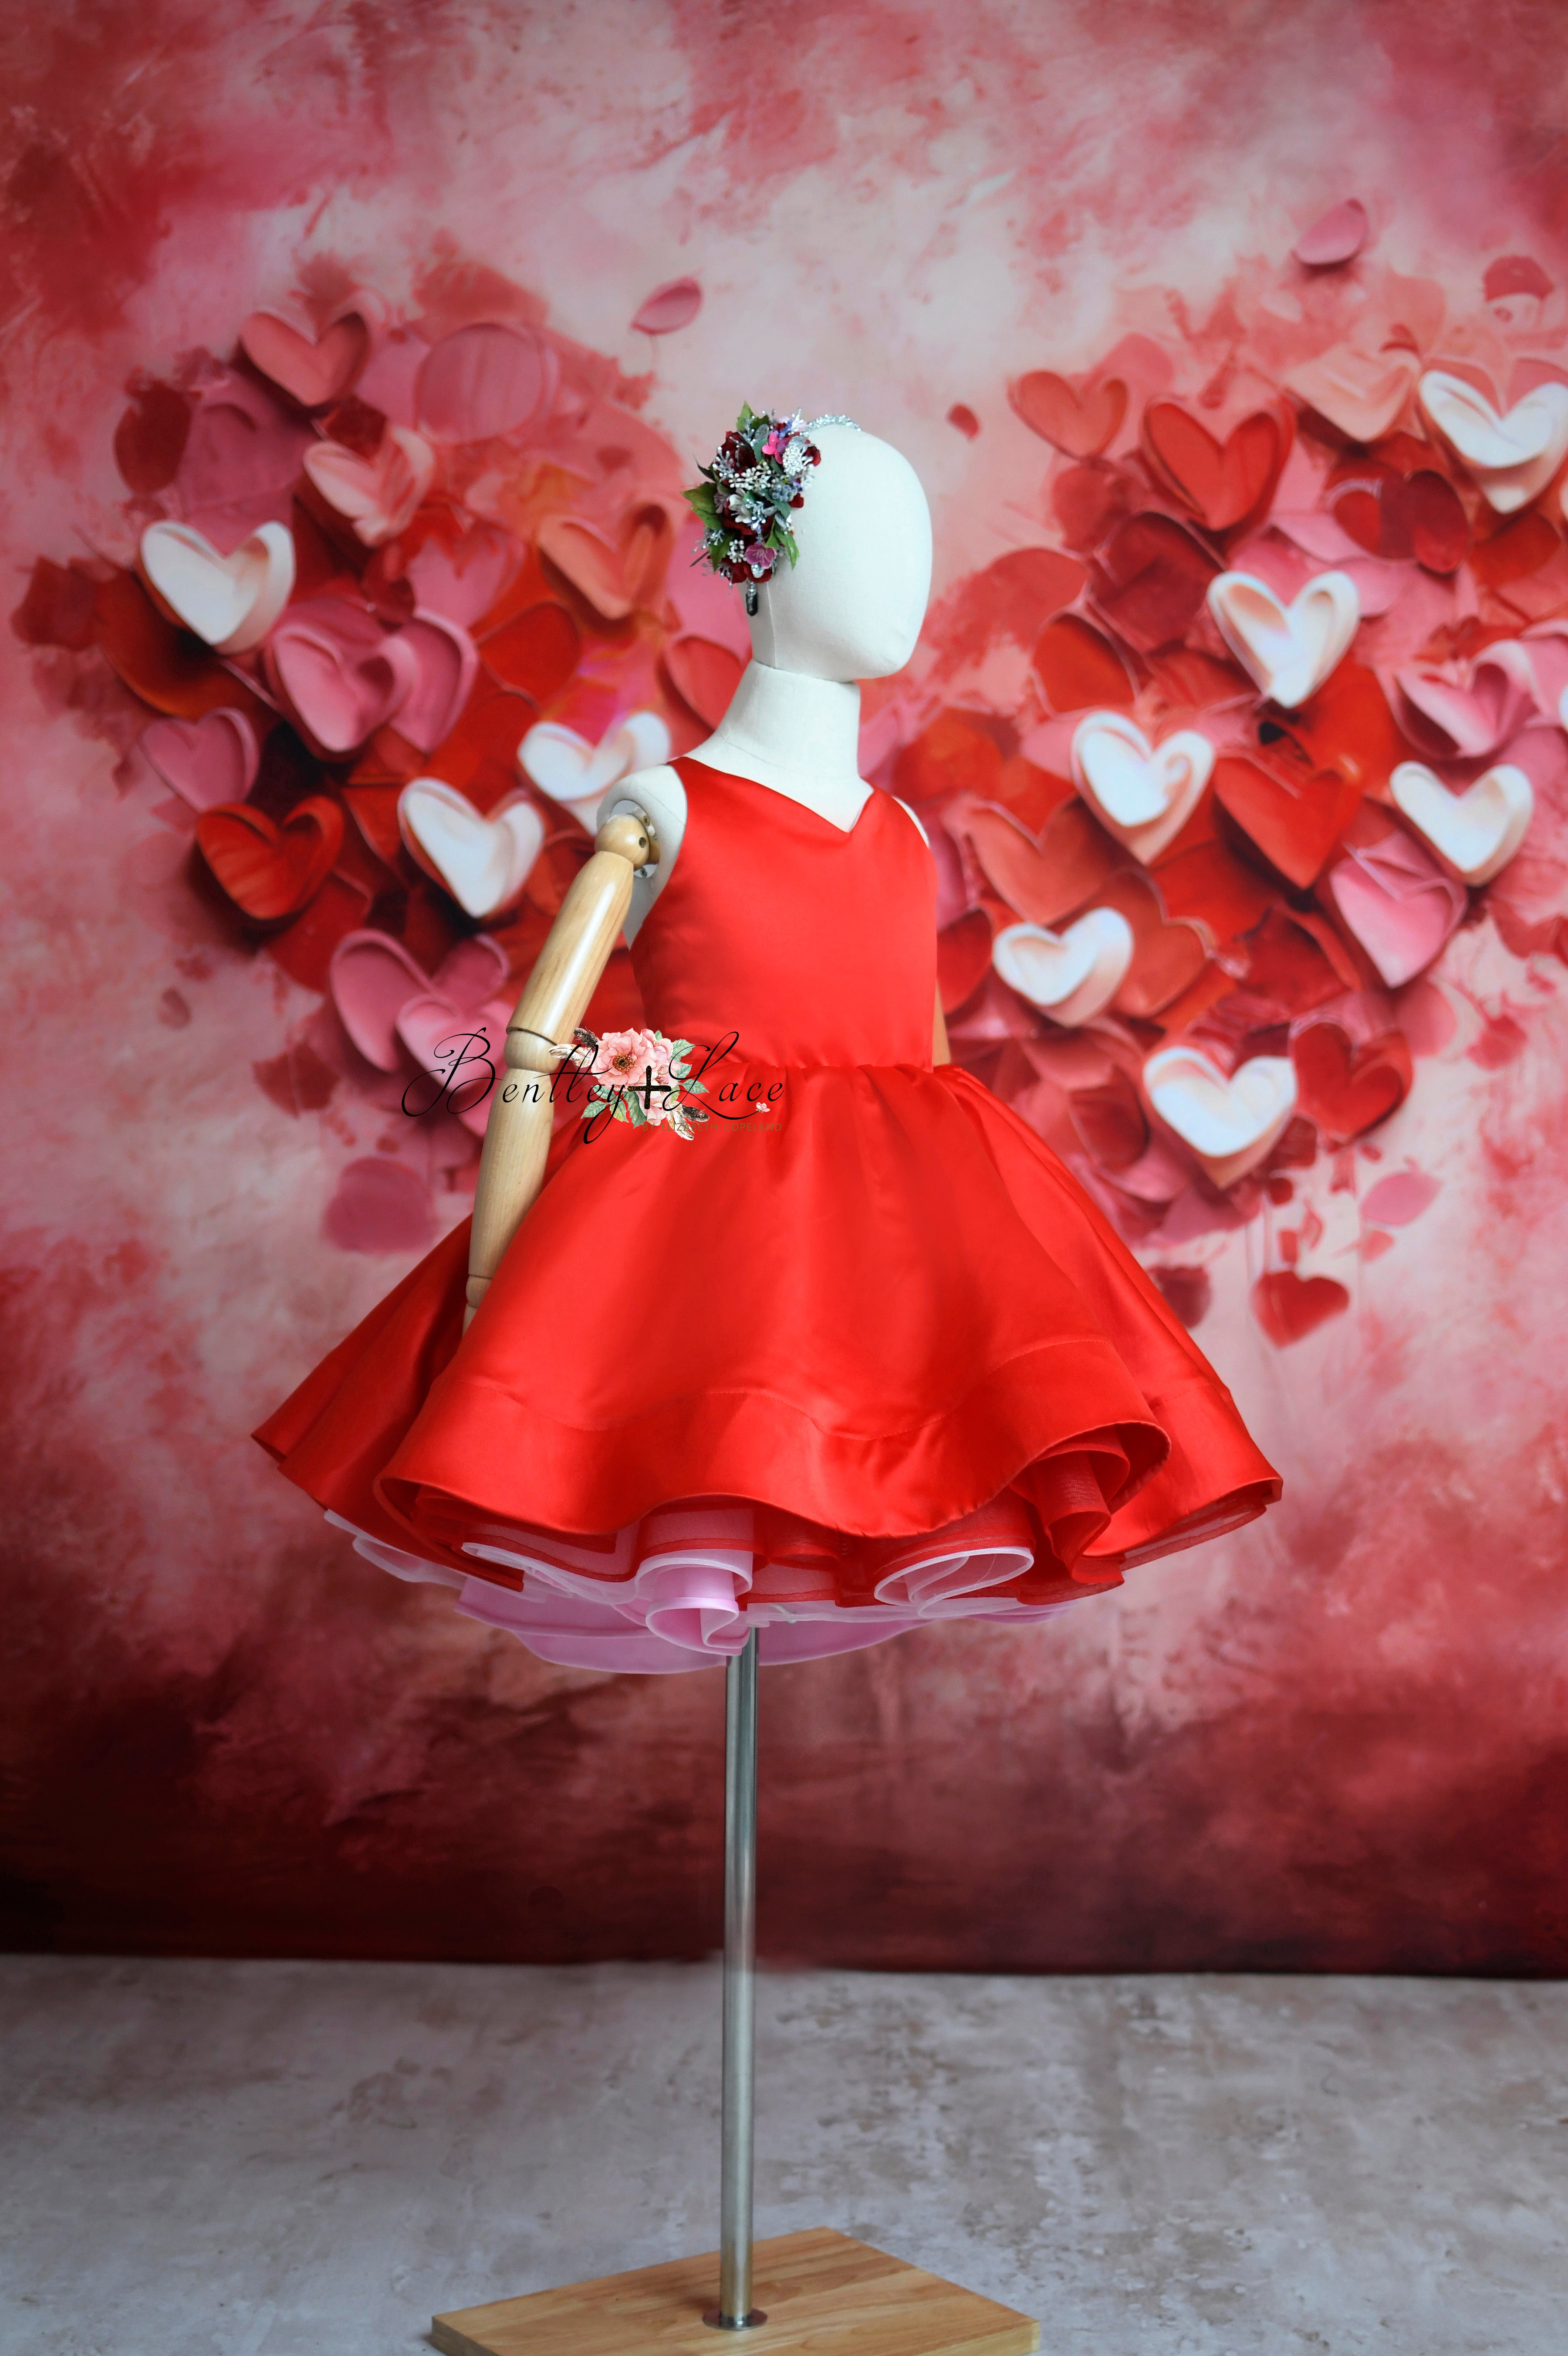 Reversible "Love Struck" Petal  Length Dress - Editorial Dress, Couture Gown, Special Occasion Dress